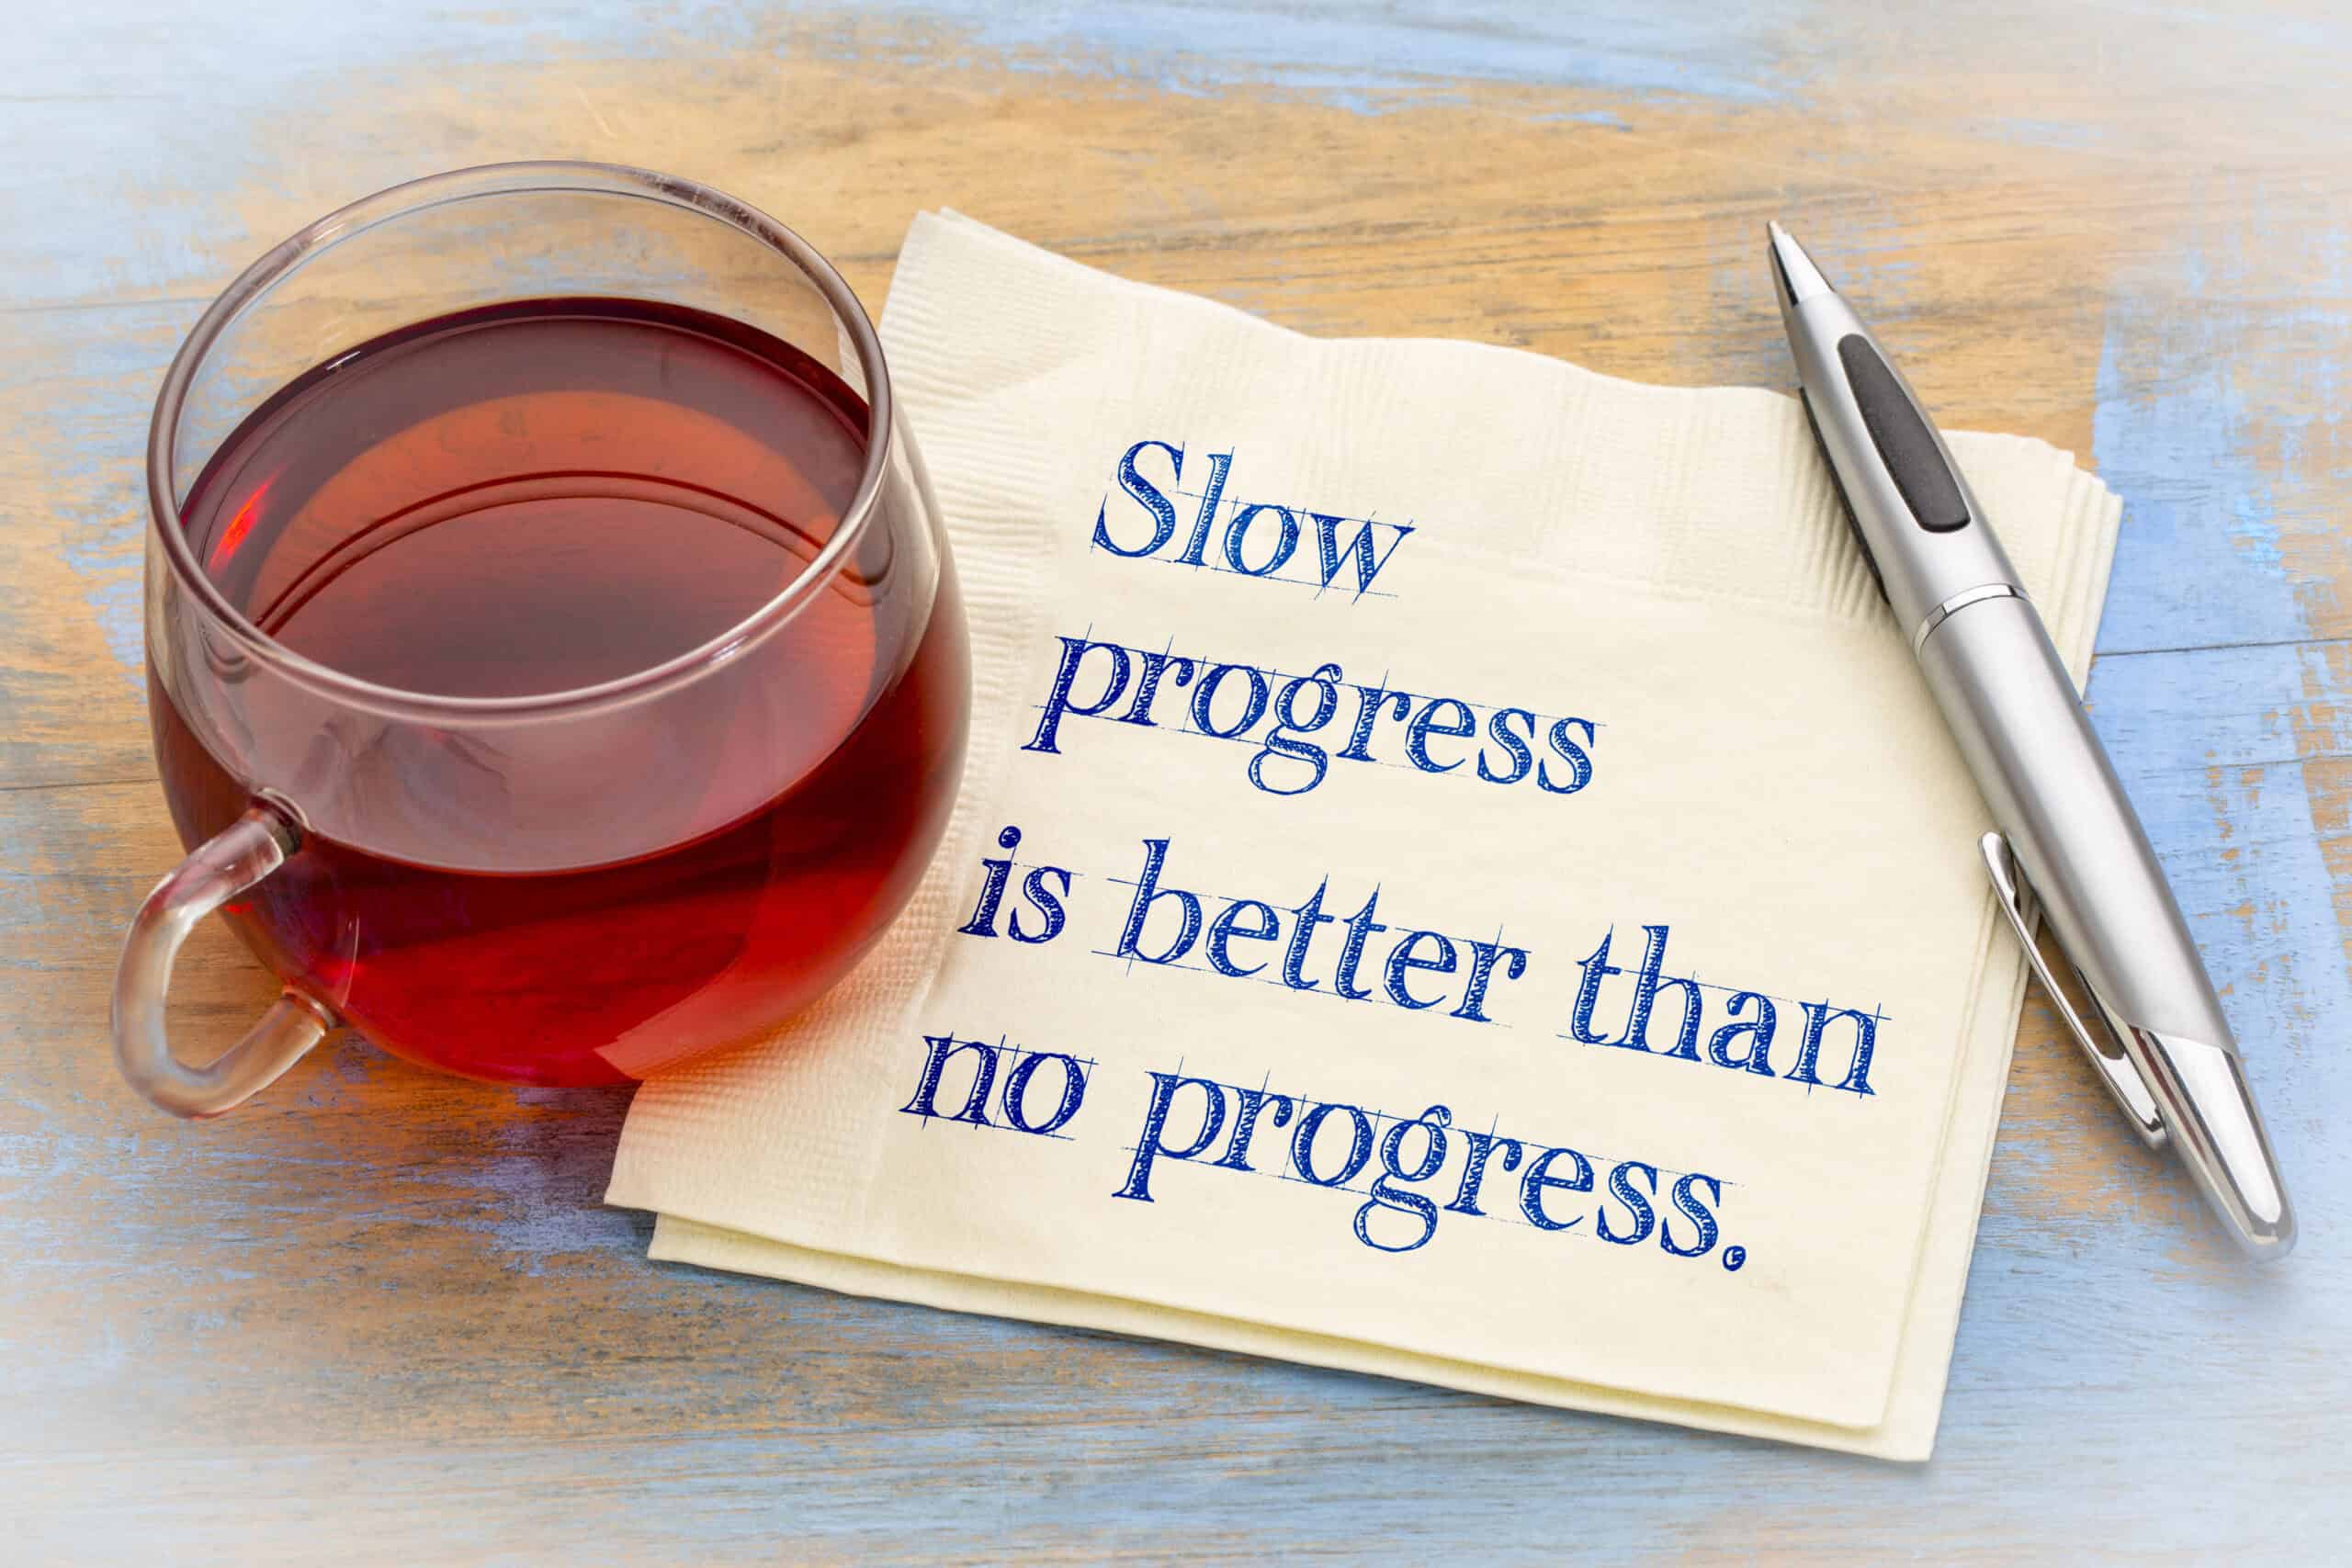 Slow progress is better than no progress inspirational note - handwriting on a napkin with a cup of coffee